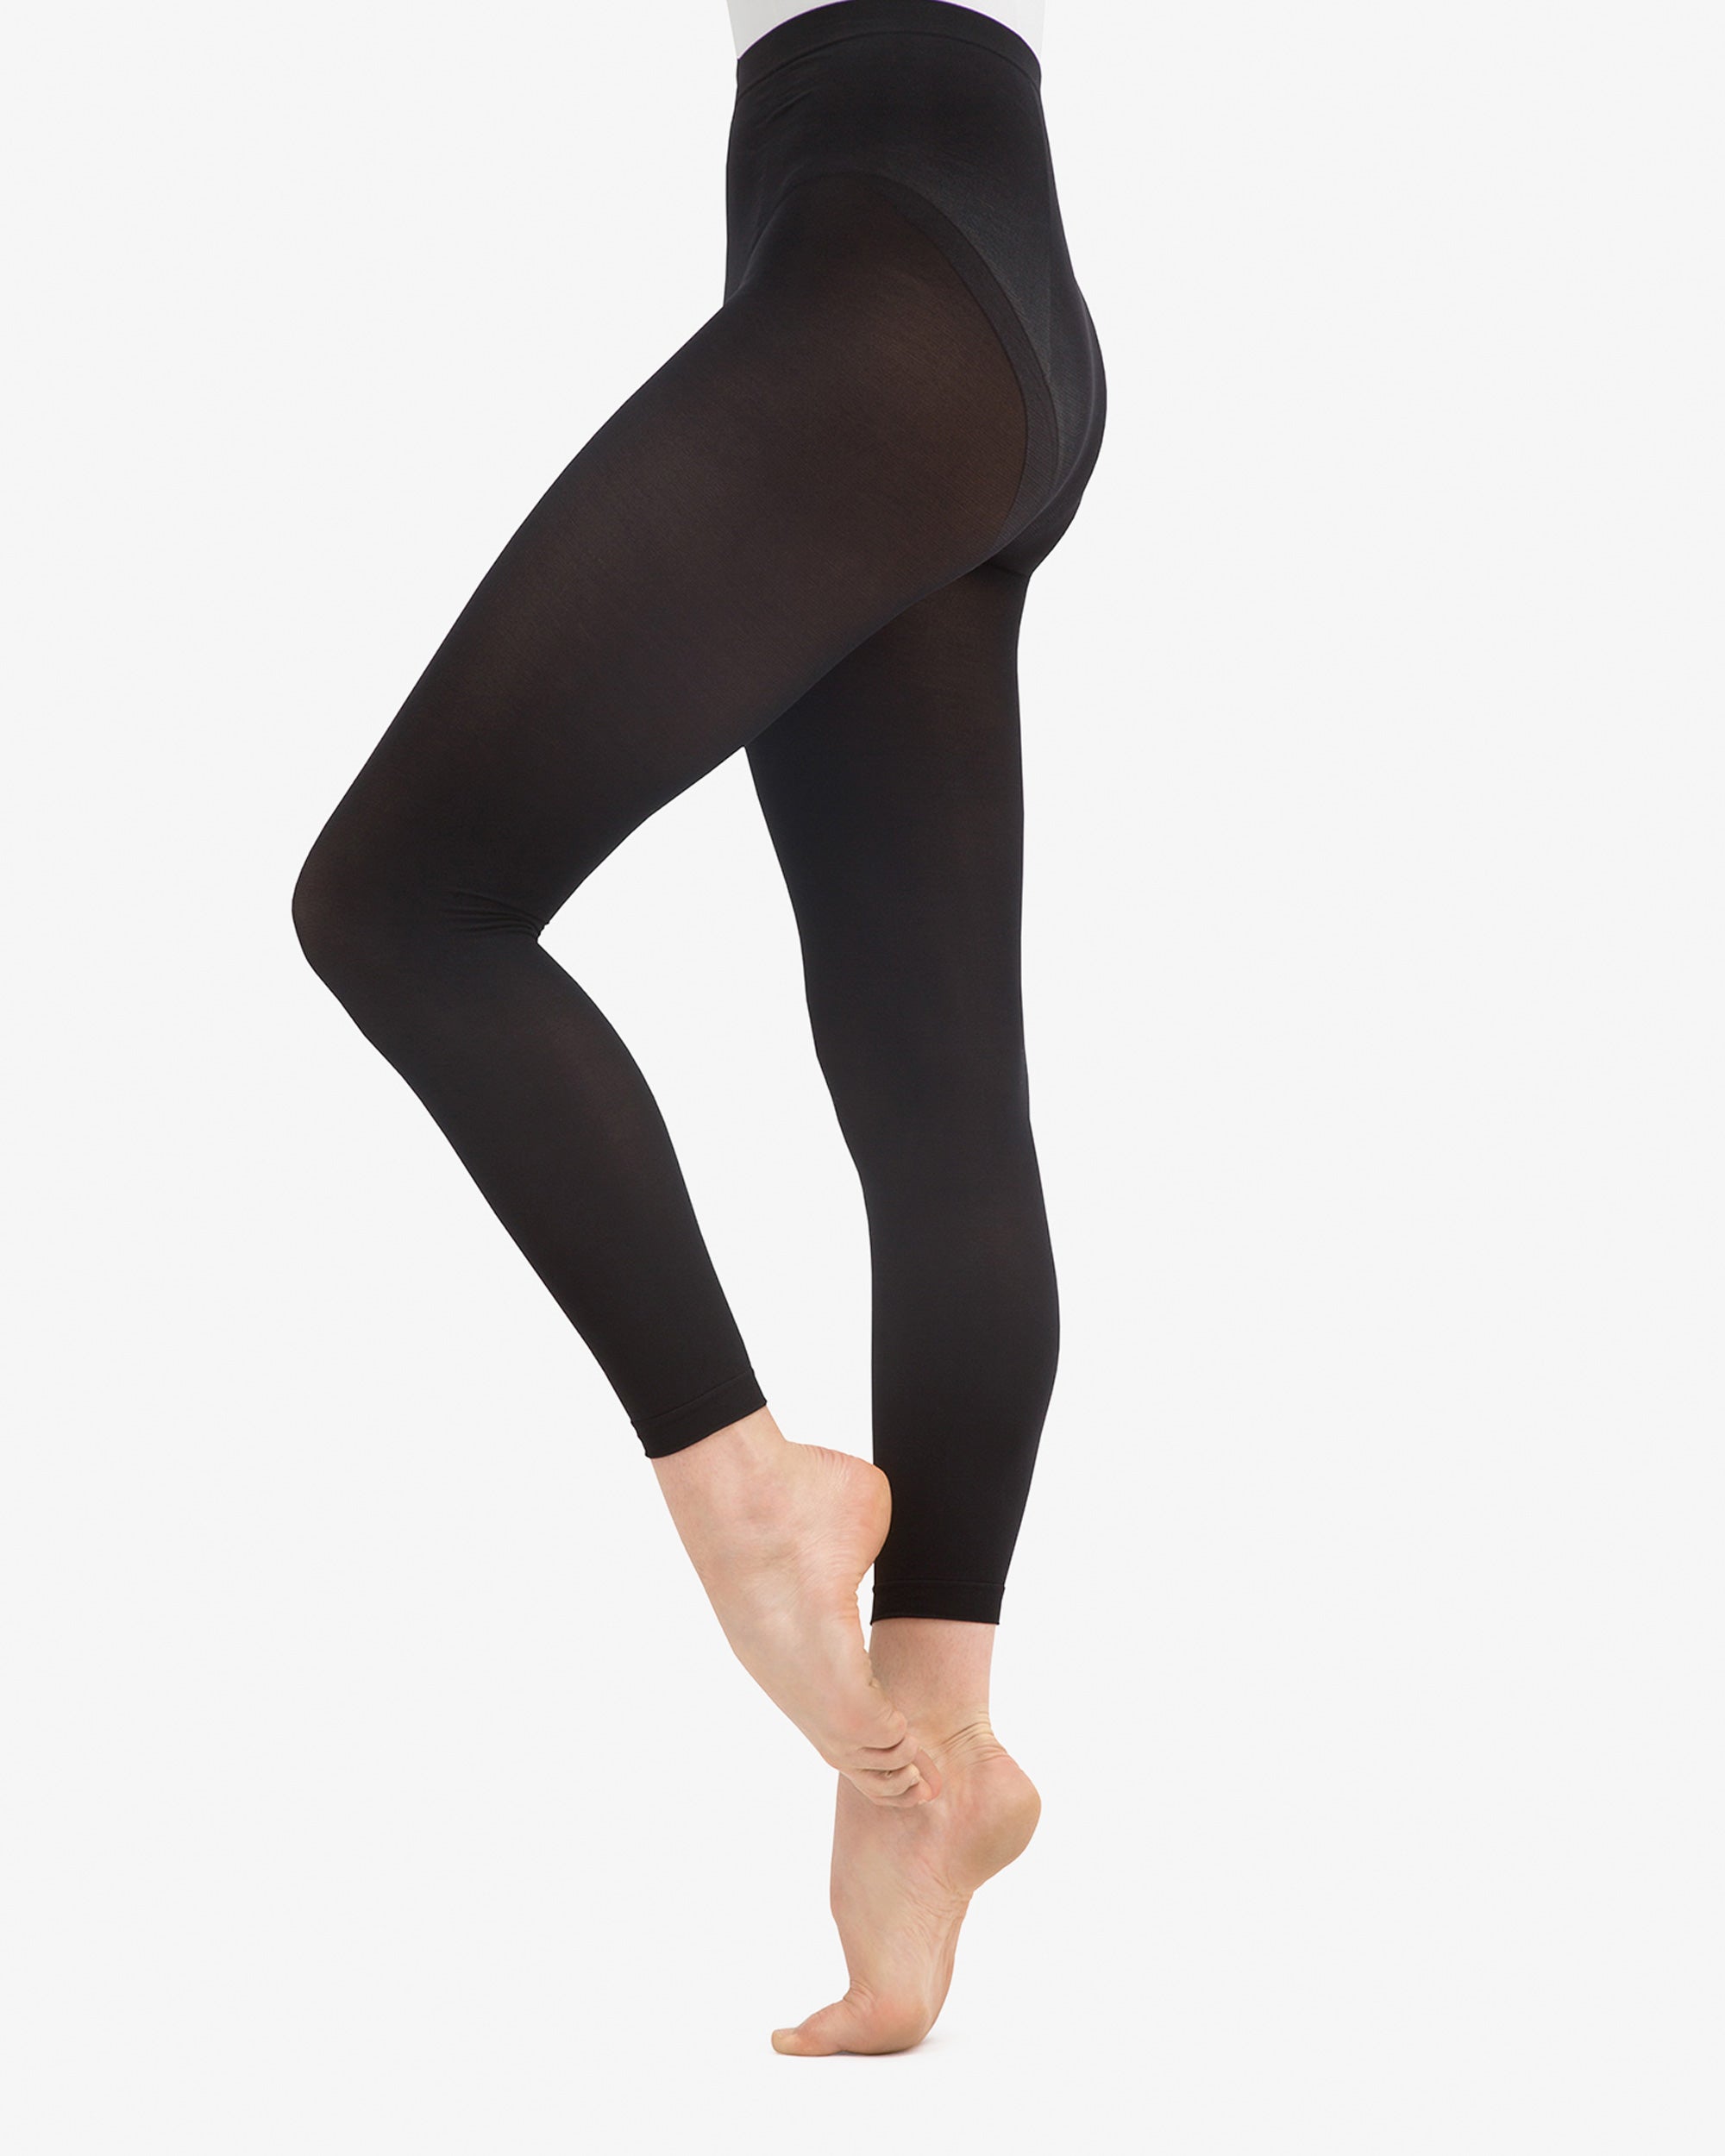 High Quality Opaque Footless Tights